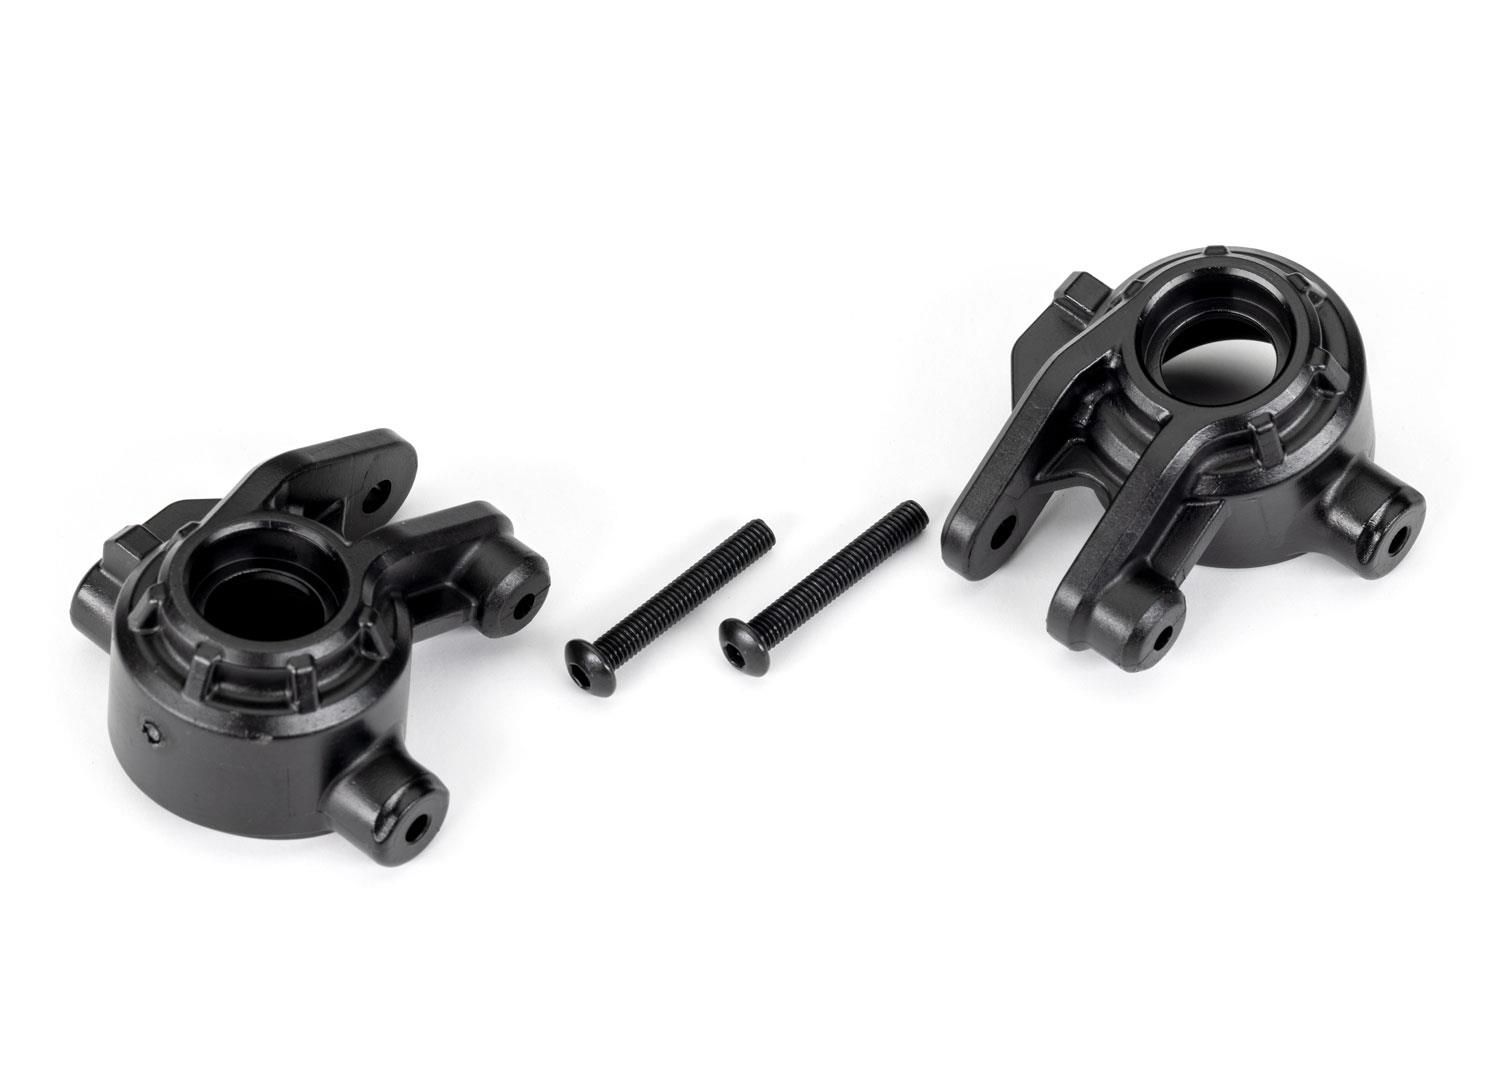 Traxxas - Steering Blocks Left/Right (for use with #9080 upgrade kit) - Black (TRX-9037)